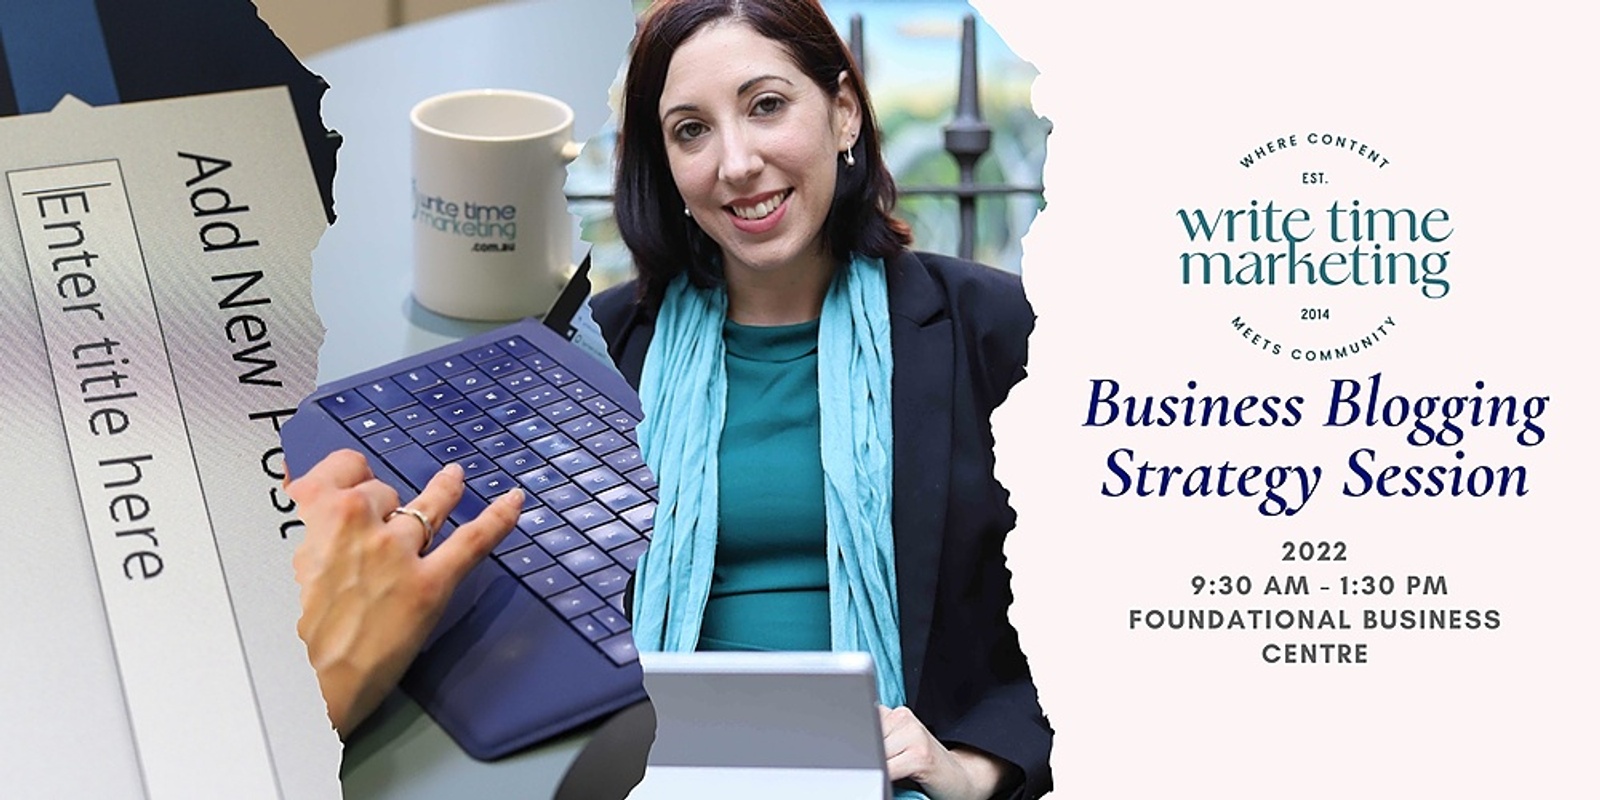 Banner image for Business Blogging Strategy Session 2022